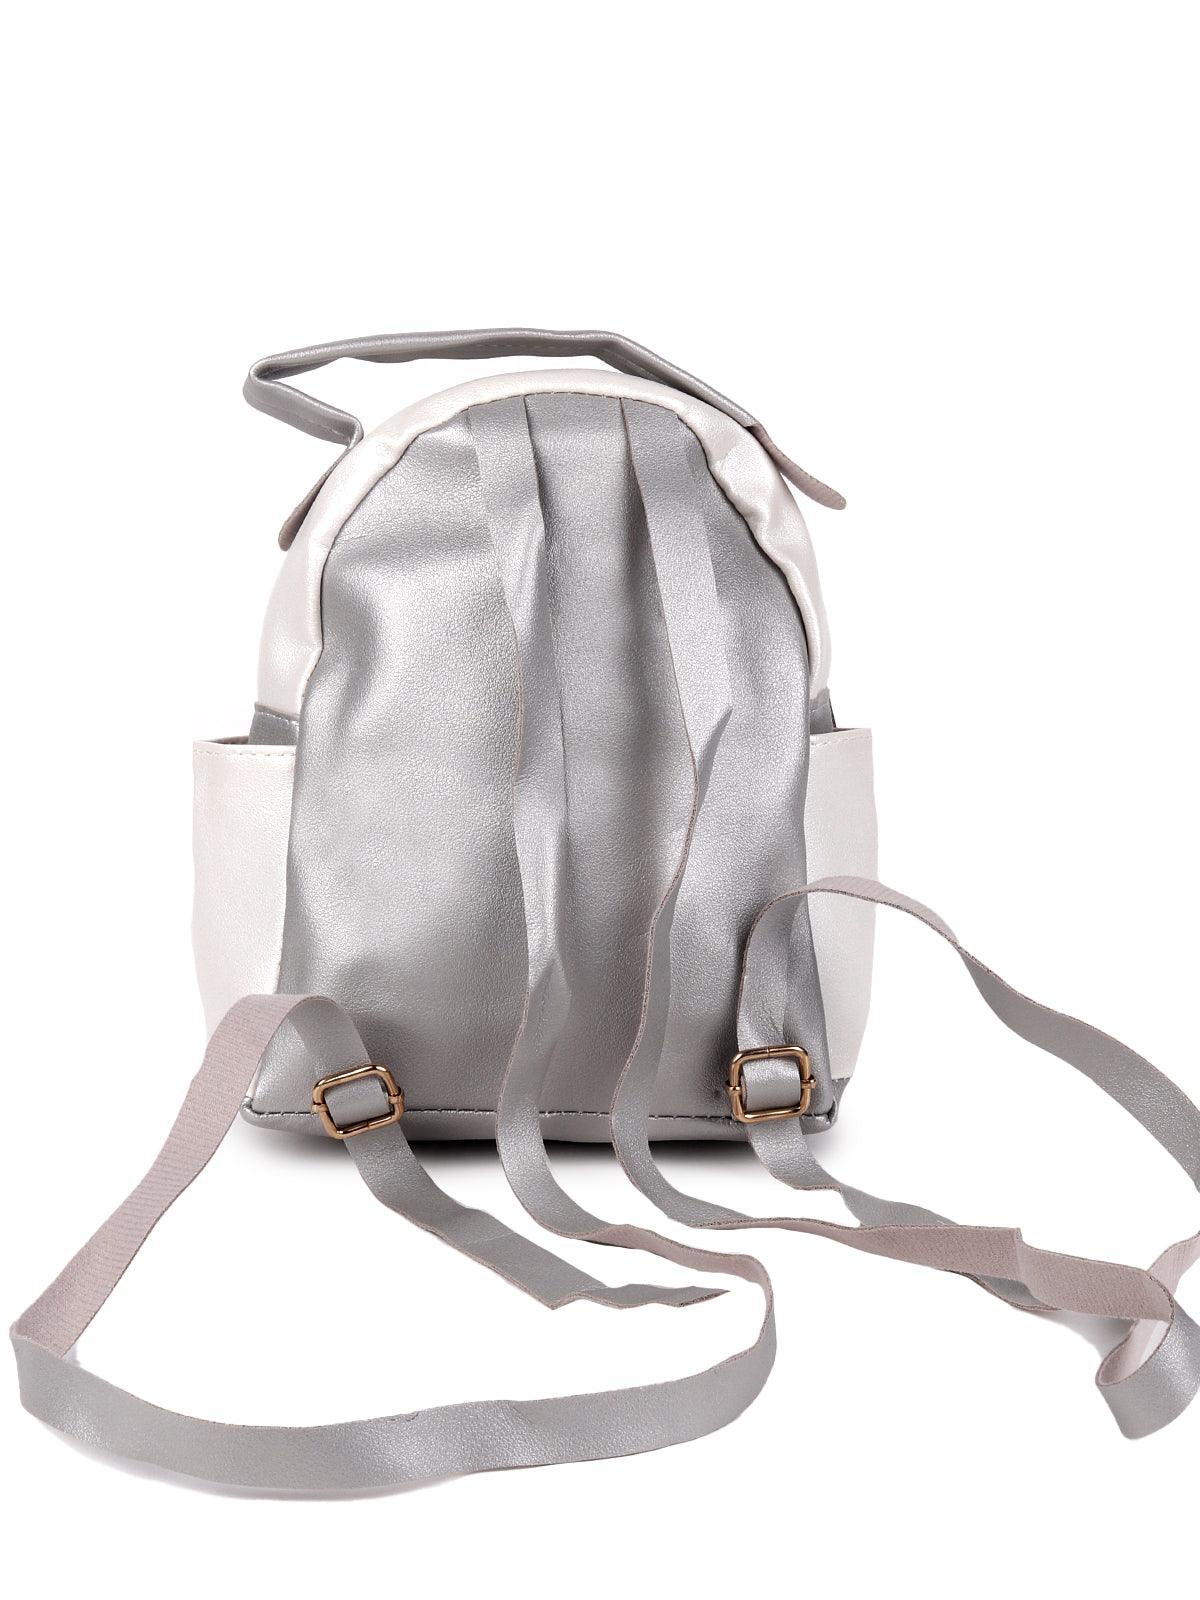 Stunning silver and white bagpack - Odette